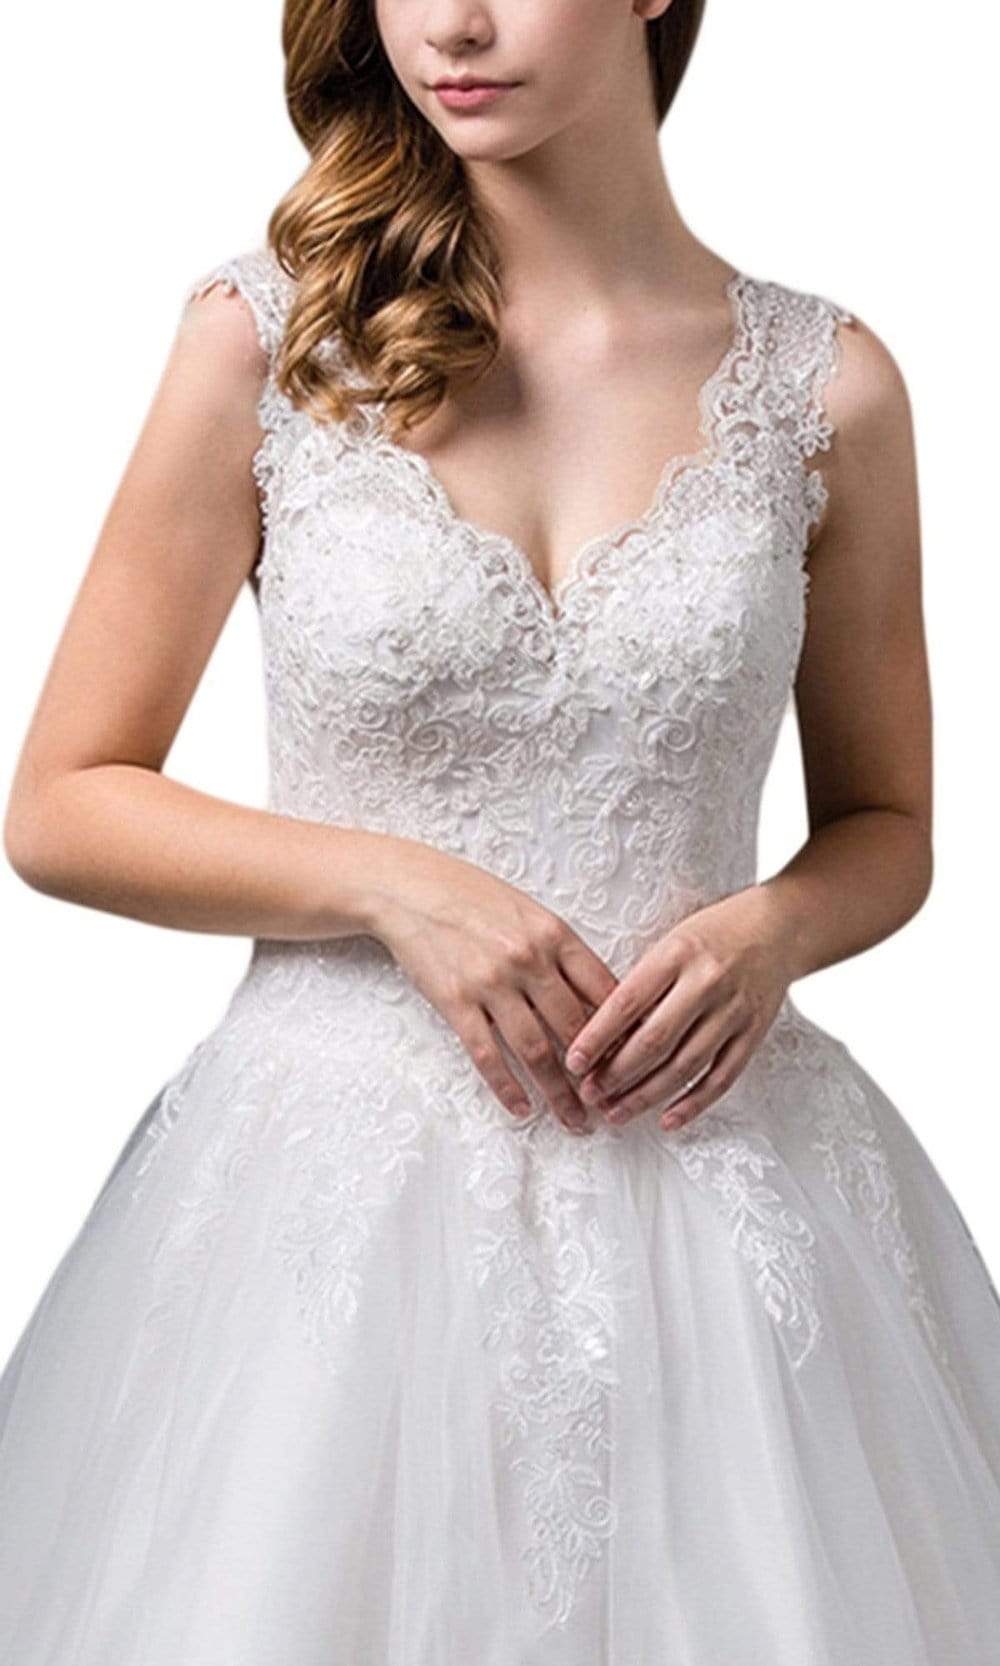 Dancing Queen Bridal - Scalloped V-Neck Lace Up Back Embellished Ballgown 71SC In White